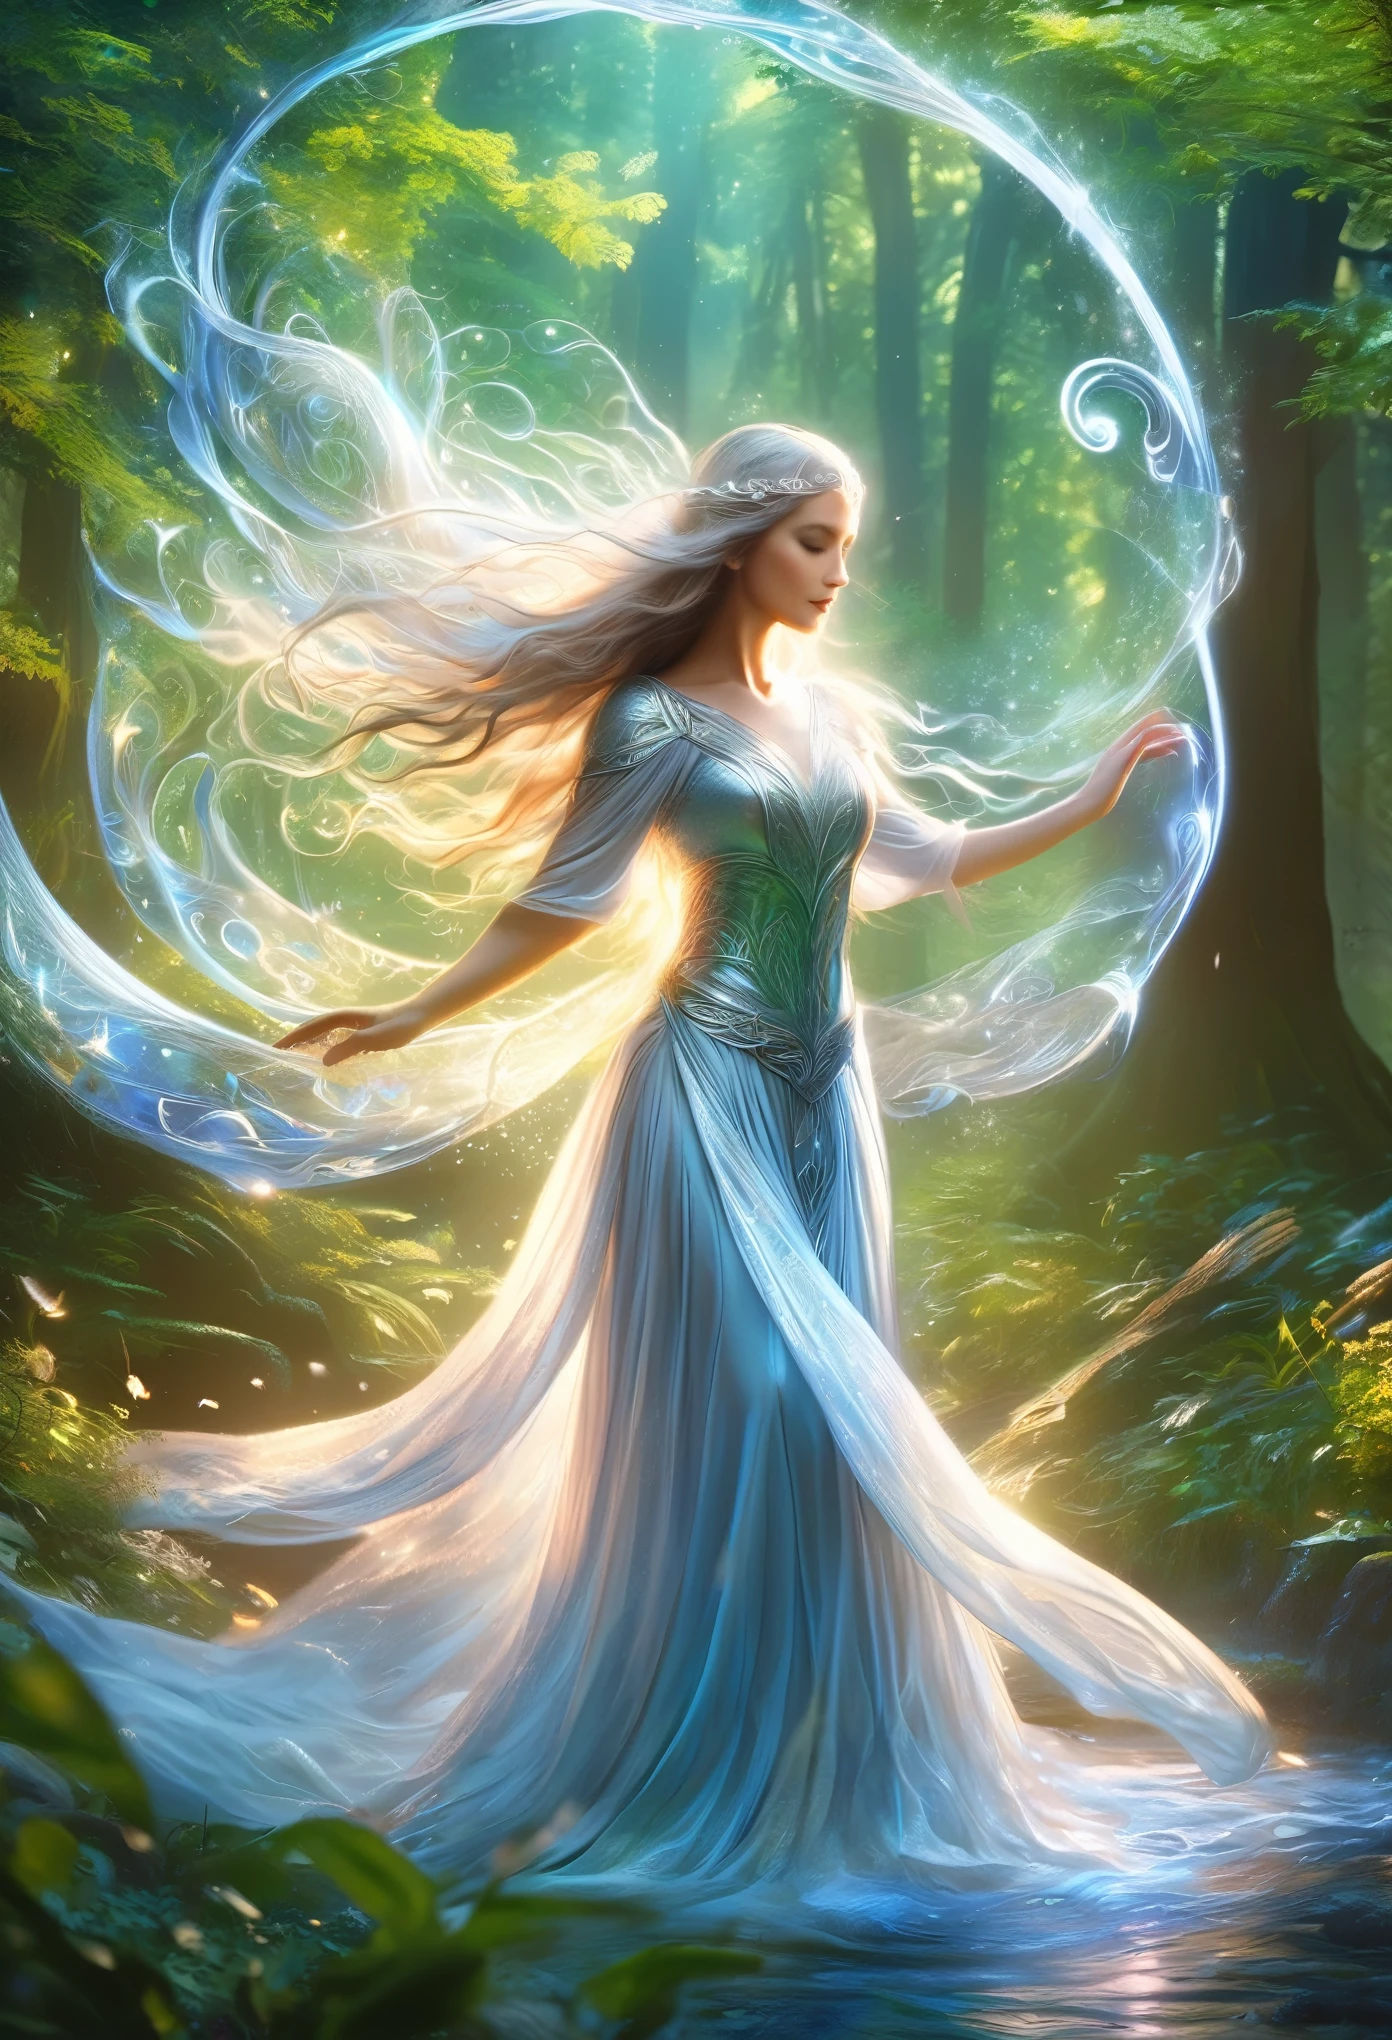 (best quality,4k,8k,highres,masterpiece:1.2), ultra-detailed, (realistic,photorealistic,photo-realistic:1.37), In the heart of an enchanted forest, bathed in the soft glow of moonlight filtering through the canopy above, stands a figure of ethereal beauty. She is an elven enchantress, her long silver hair cascading in shimmering waves around her slender form like strands of moonlight woven into silk. Her eyes, a mesmerizing blend of iridescent hues, shimmer with an otherworldly light, reflecting the myriad colors of the forest around her. They are windows to a soul as ancient as the trees themselves, filled with wisdom and mystery far beyond her tender years. Clad in robes of flowing white adorned with intricate patterns of silver thread, she moves with a grace that is both elegant and effortless. Each movement is a dance, a fluid motion that seems to ripple through the air like water flowing over smooth stones. As she raises her delicate hands to the sky, the air around her crackles with magical energy, the very essence of the forest responding to her call. Words of power spill from her lips like liquid silver, ancient incantations that echo through the stillness of the night with a haunting melody. With each word, tendrils of magical energy begin to swirl around her, weaving together in a shimmering vortex of light and shadow. Shapes begin to form within the swirling maelstrom, phantom creatures born of pure magic dancing to the rhythm of her voice. And as she reaches the climax of her incantation, her voice rises to a crescendo, filling the forest with a symphony of power and wonder. With a final flourish of her hands, she releases the spell, the magical energies coalescing into a radiant burst of light that illuminates the darkness like a thousand stars.(art by Amano Yoshitaka:1.3)